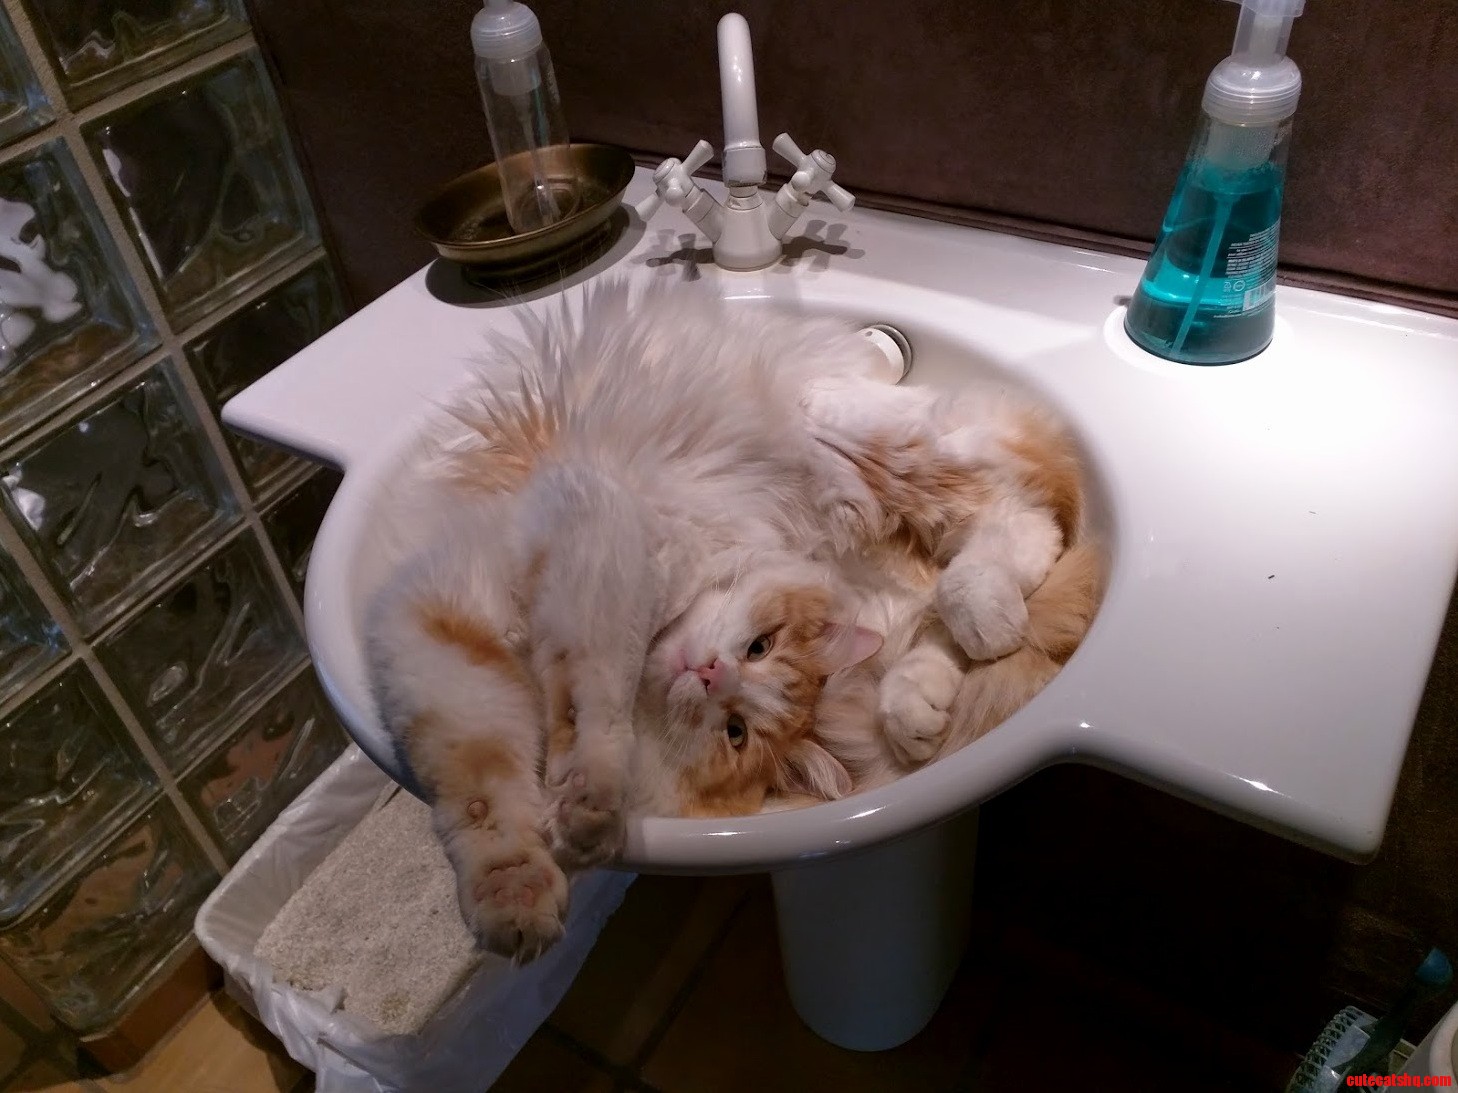 Sunday morning… too early to get out of the sink just yet…